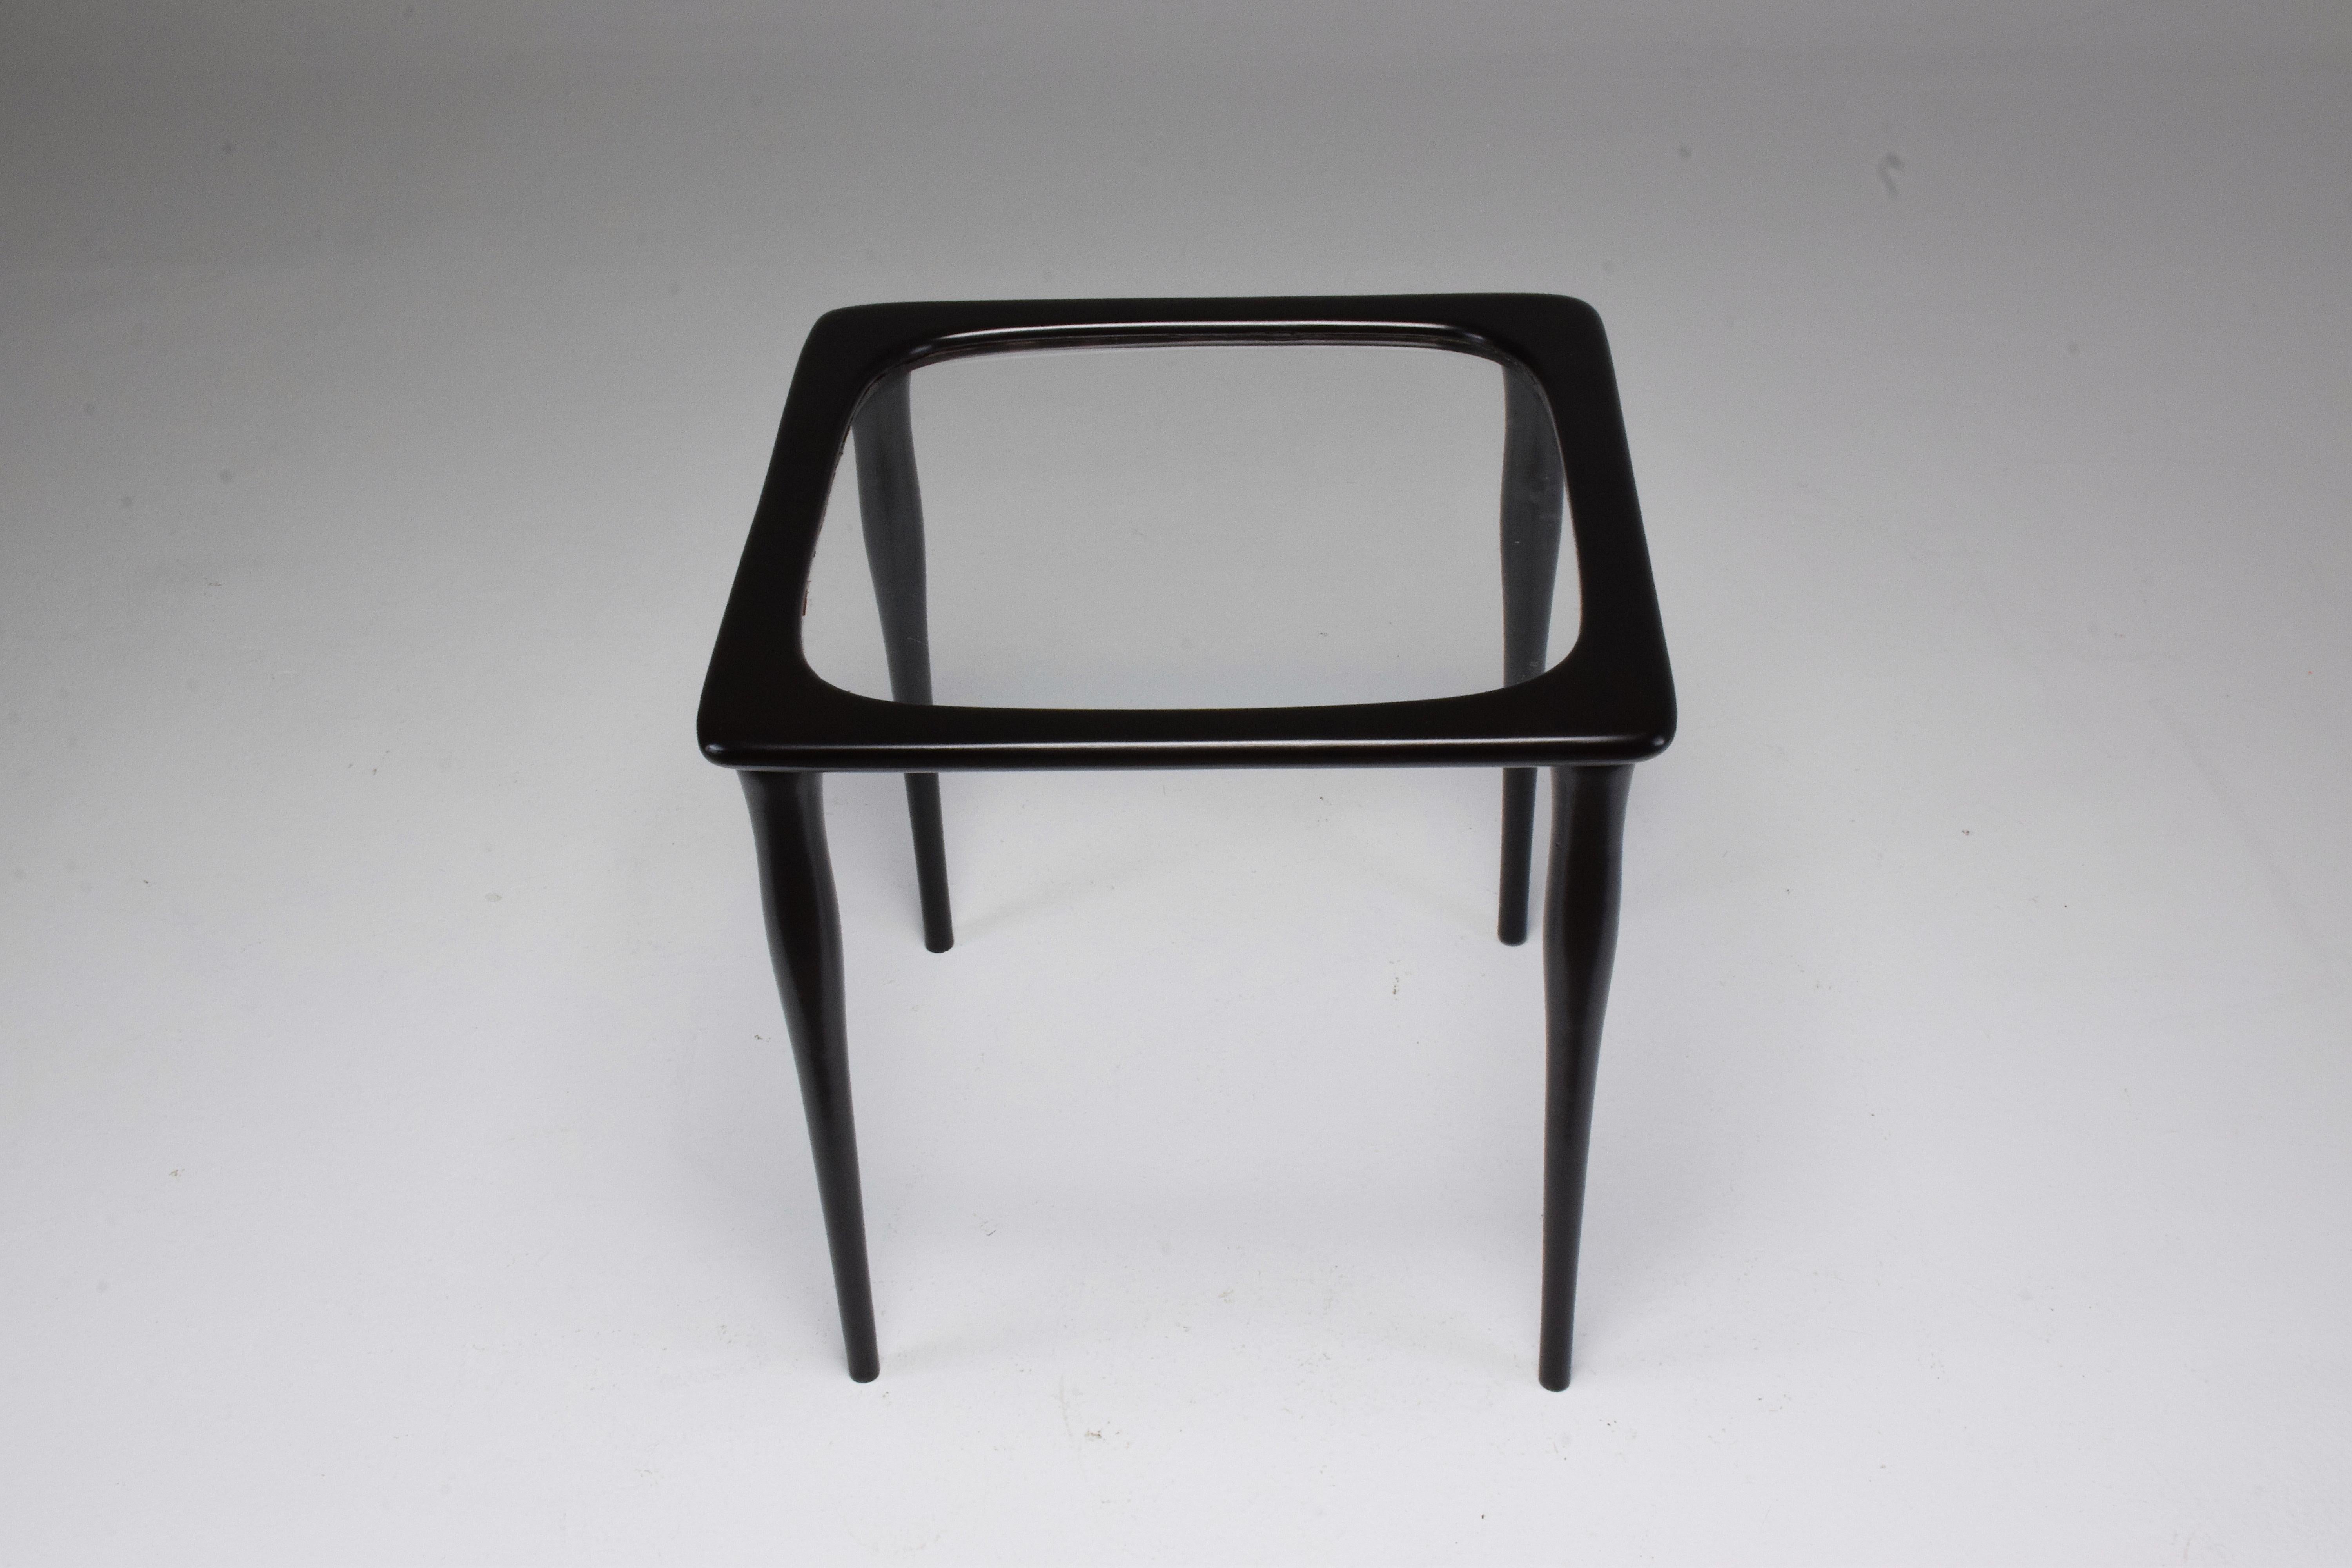 Three Italian Midcentury Nesting Tables by Ico Parisi, 1950s For Sale 7